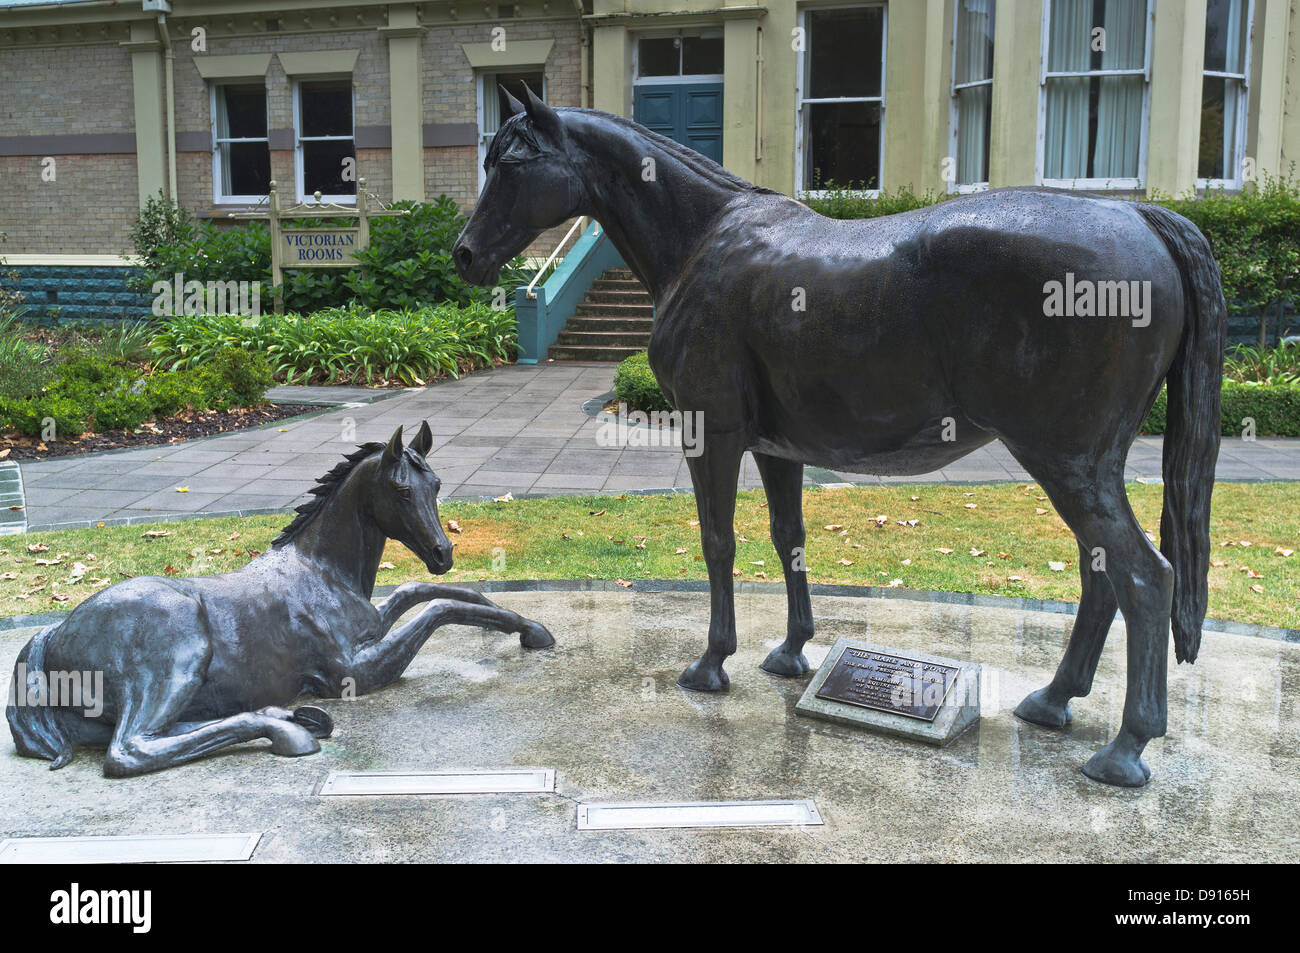 dh Horses statue CAMBRIDGE NEW ZEALAND Racehorse Racing horse and foal statues outside Cambridge Town Hall Stock Photo